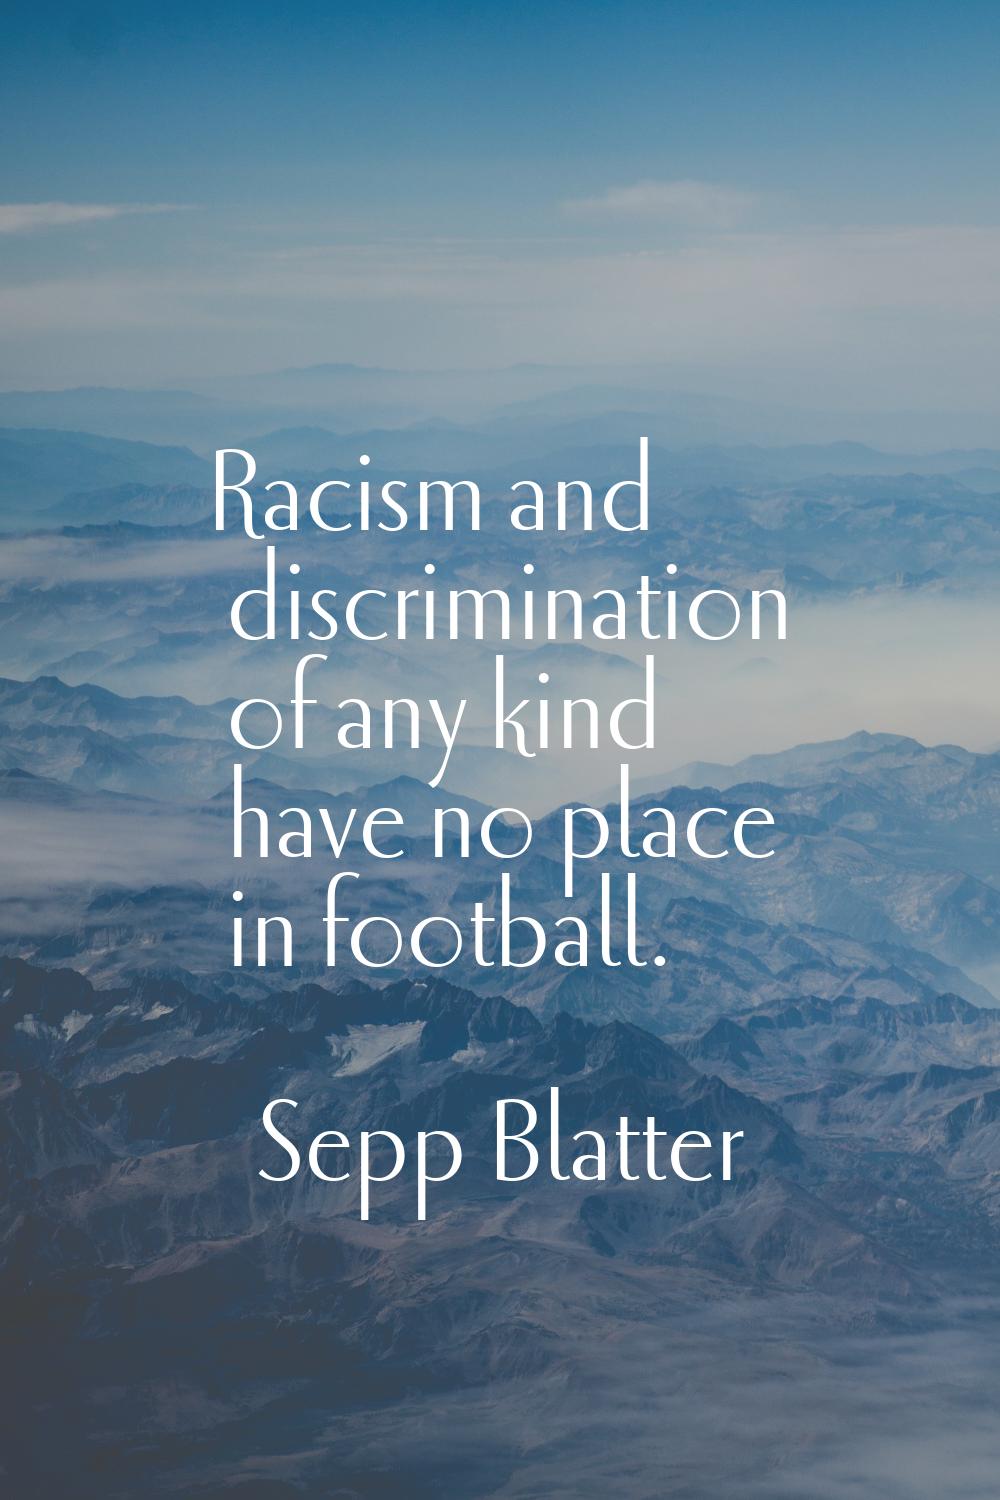 Racism and discrimination of any kind have no place in football.